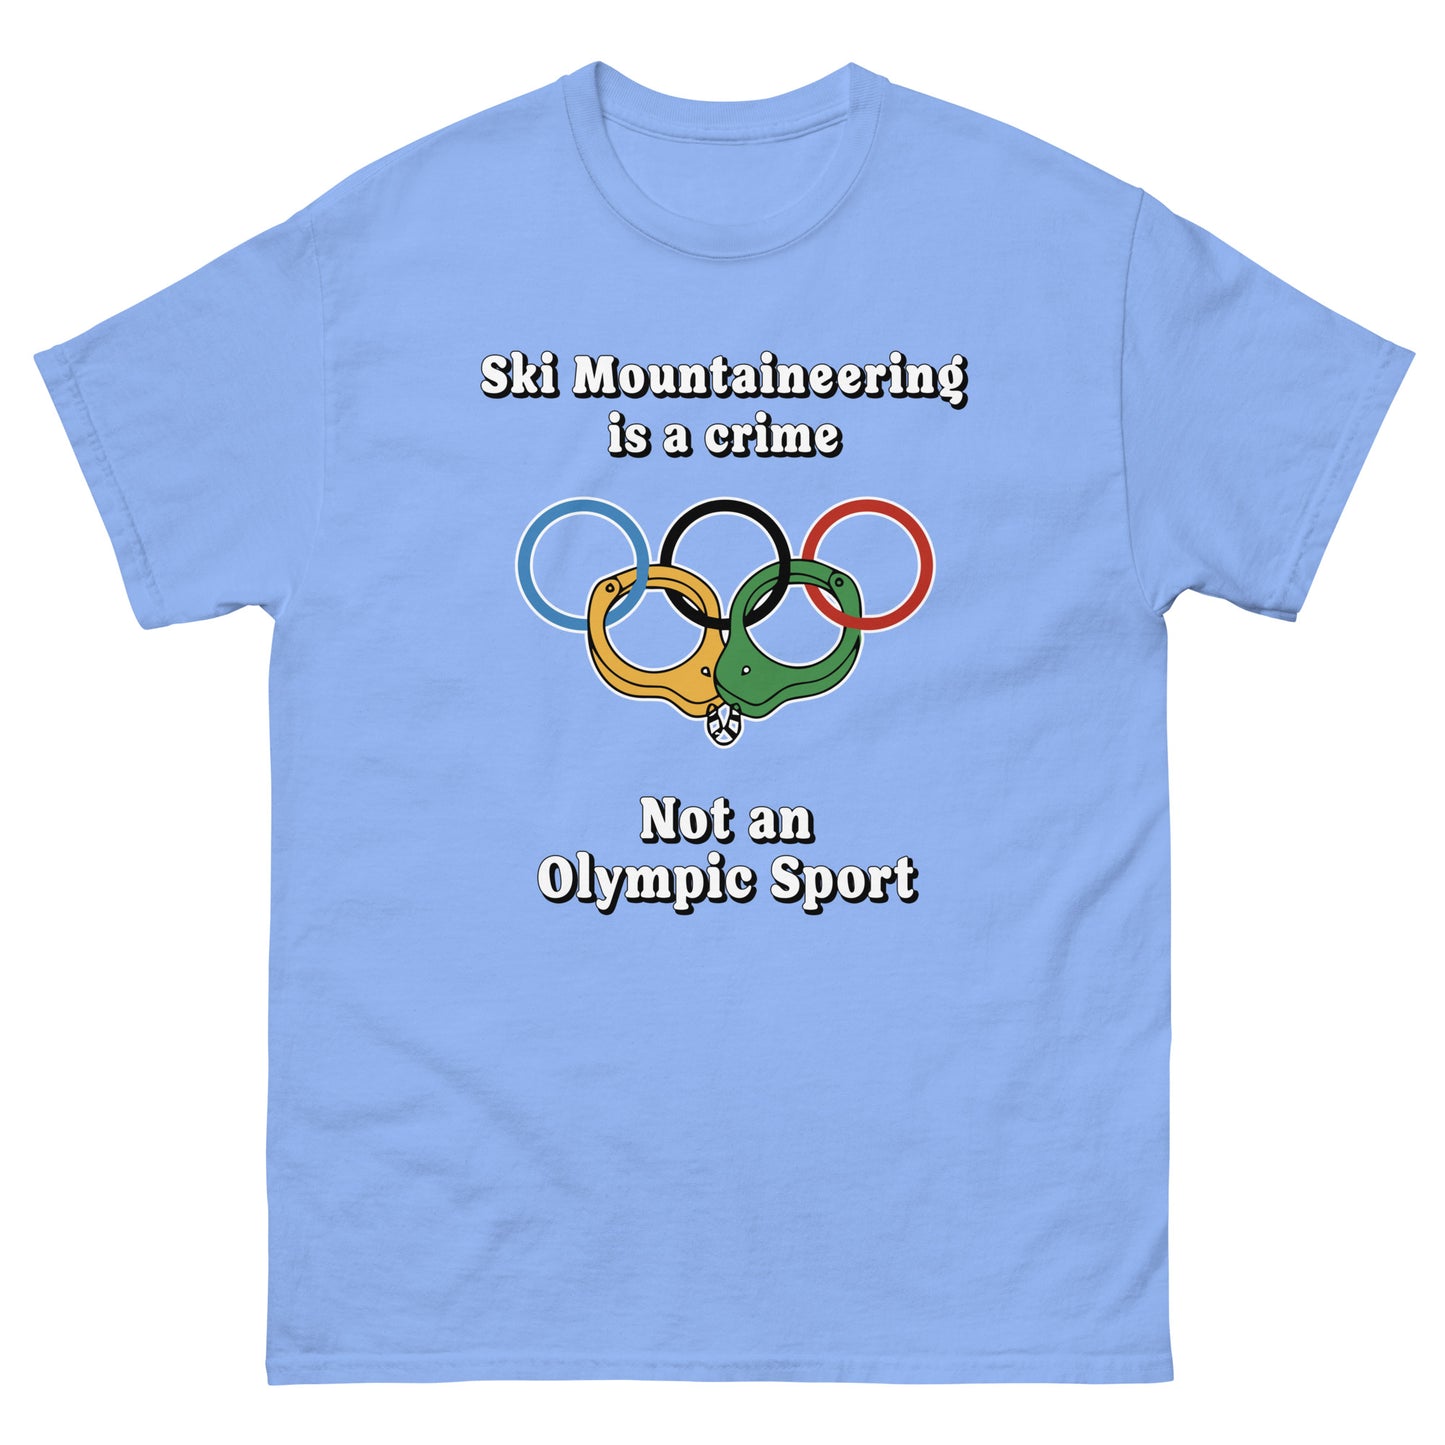 Ski Mountaineering is a Crime T-shirt